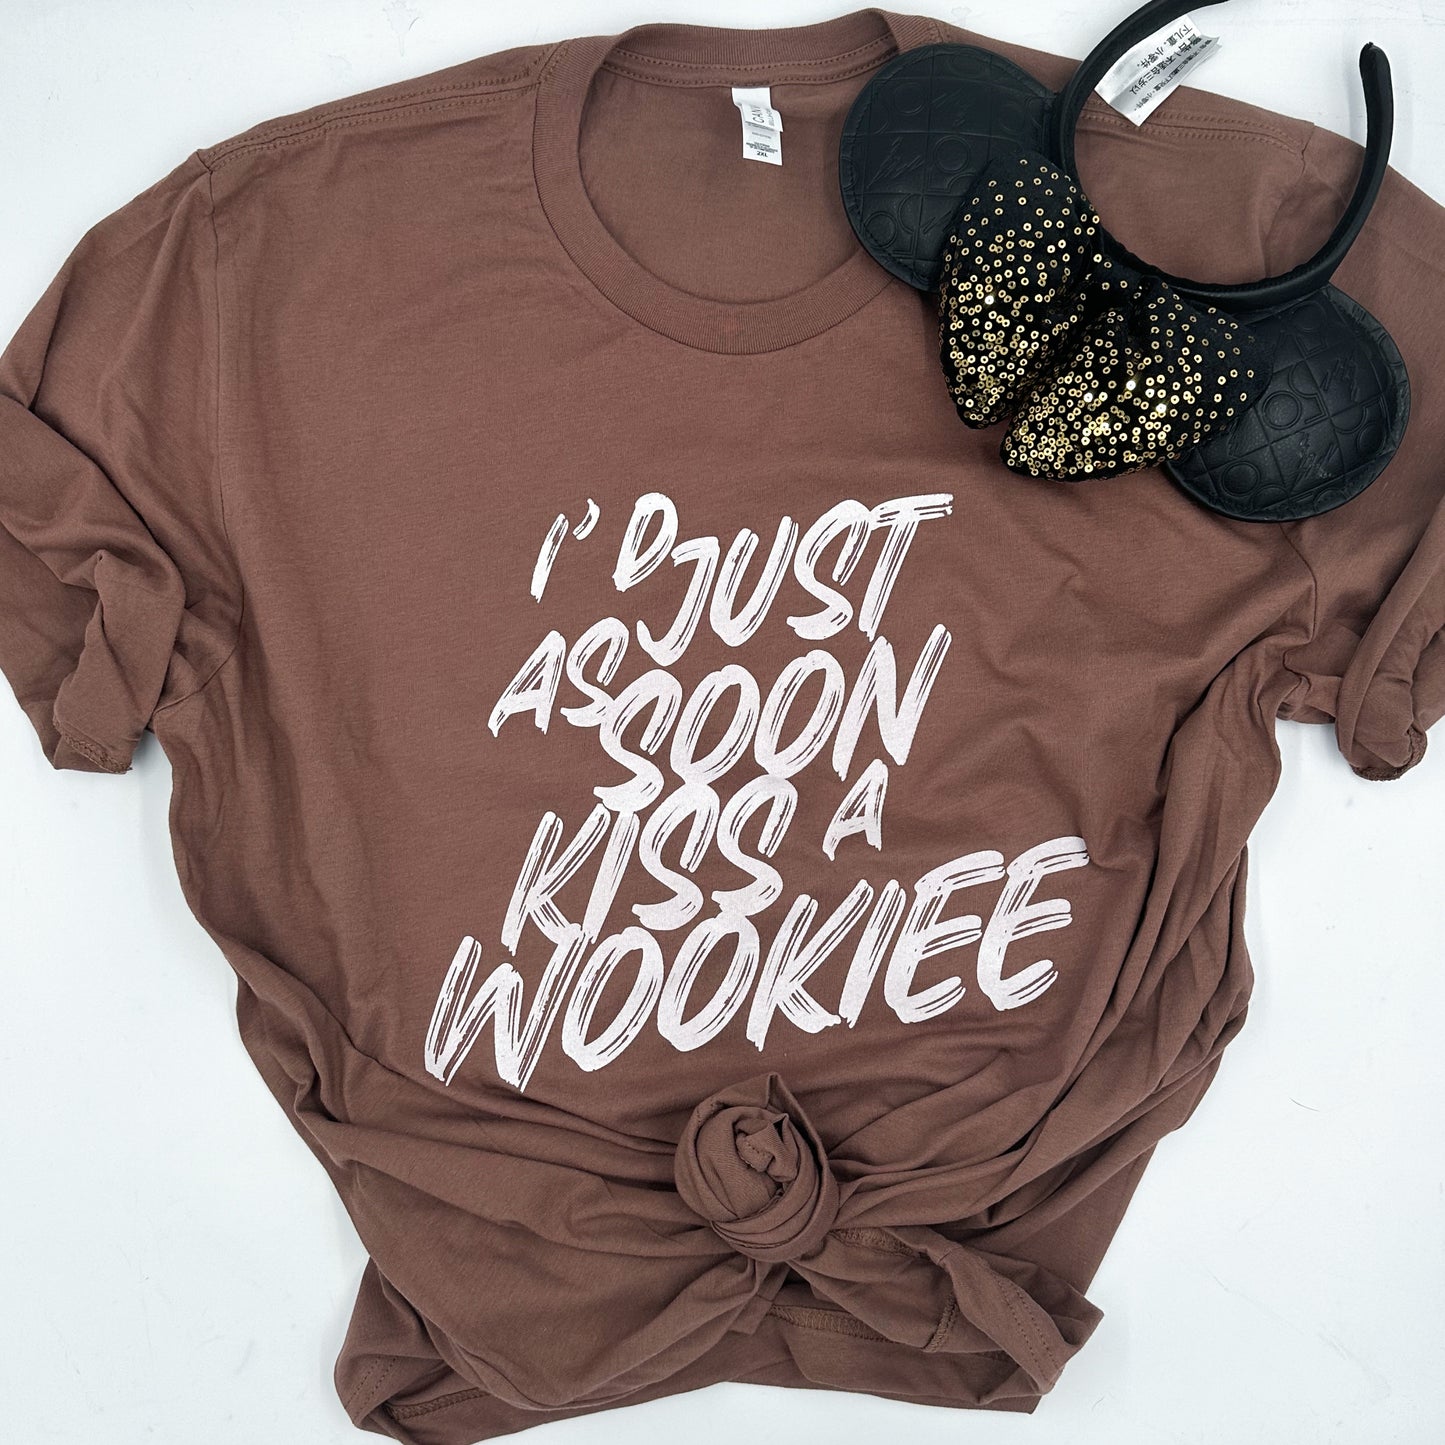 I'd just as soon kiss a Wookiee | unisex tee